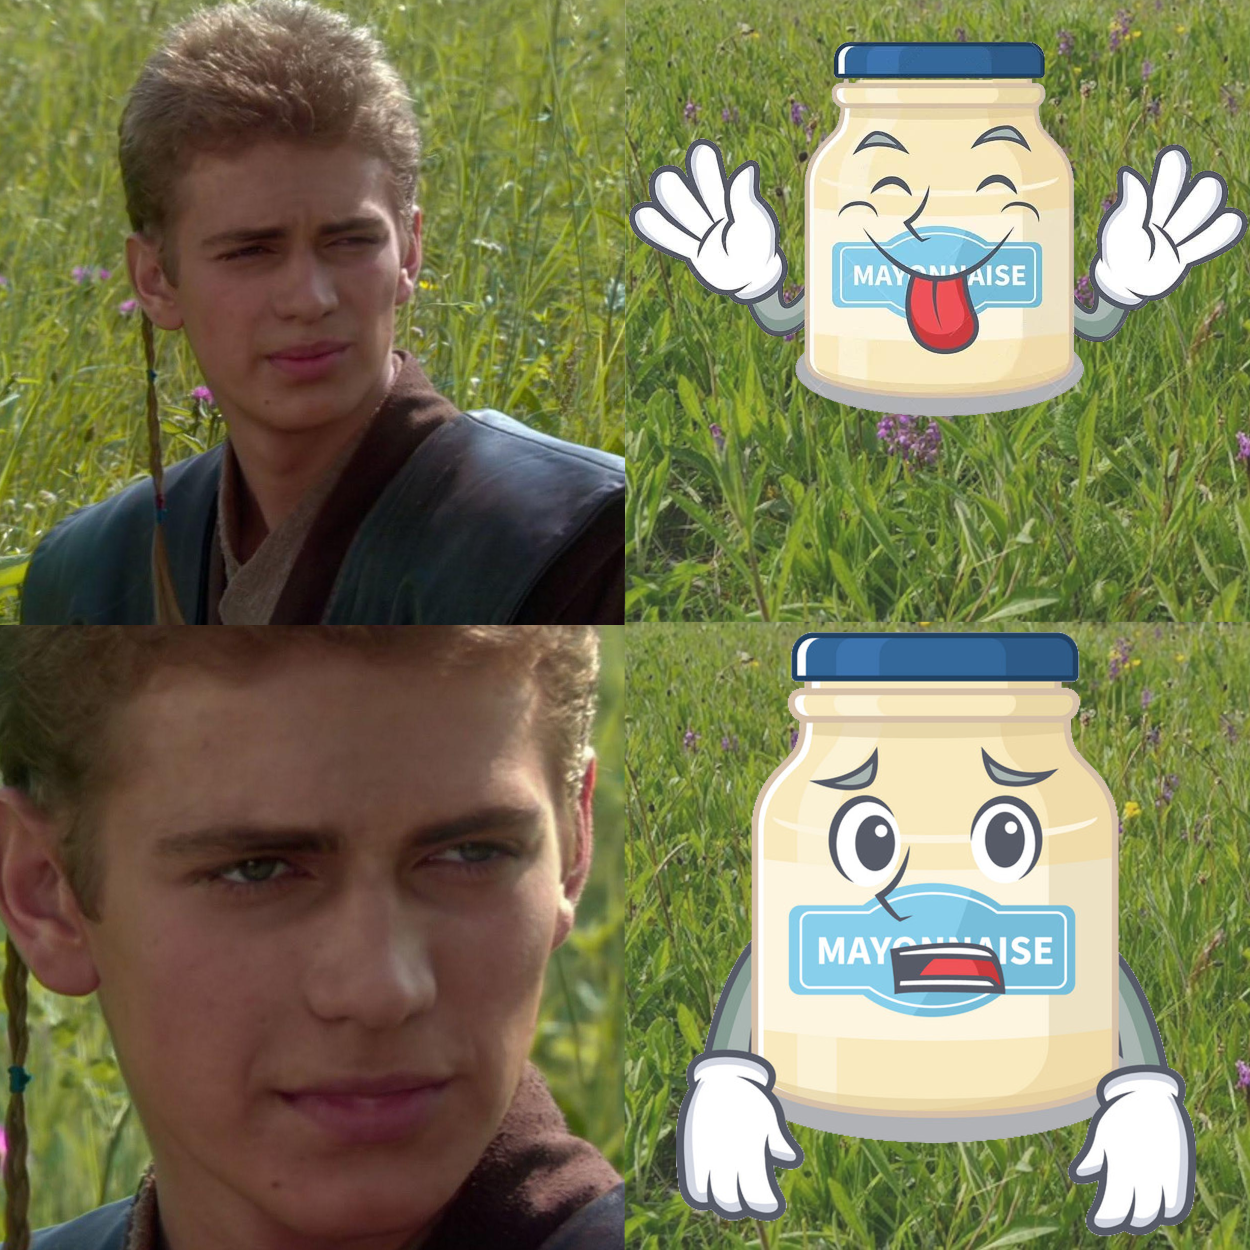 High Quality Mayonnaise For the Better, Right? Blank Meme Template